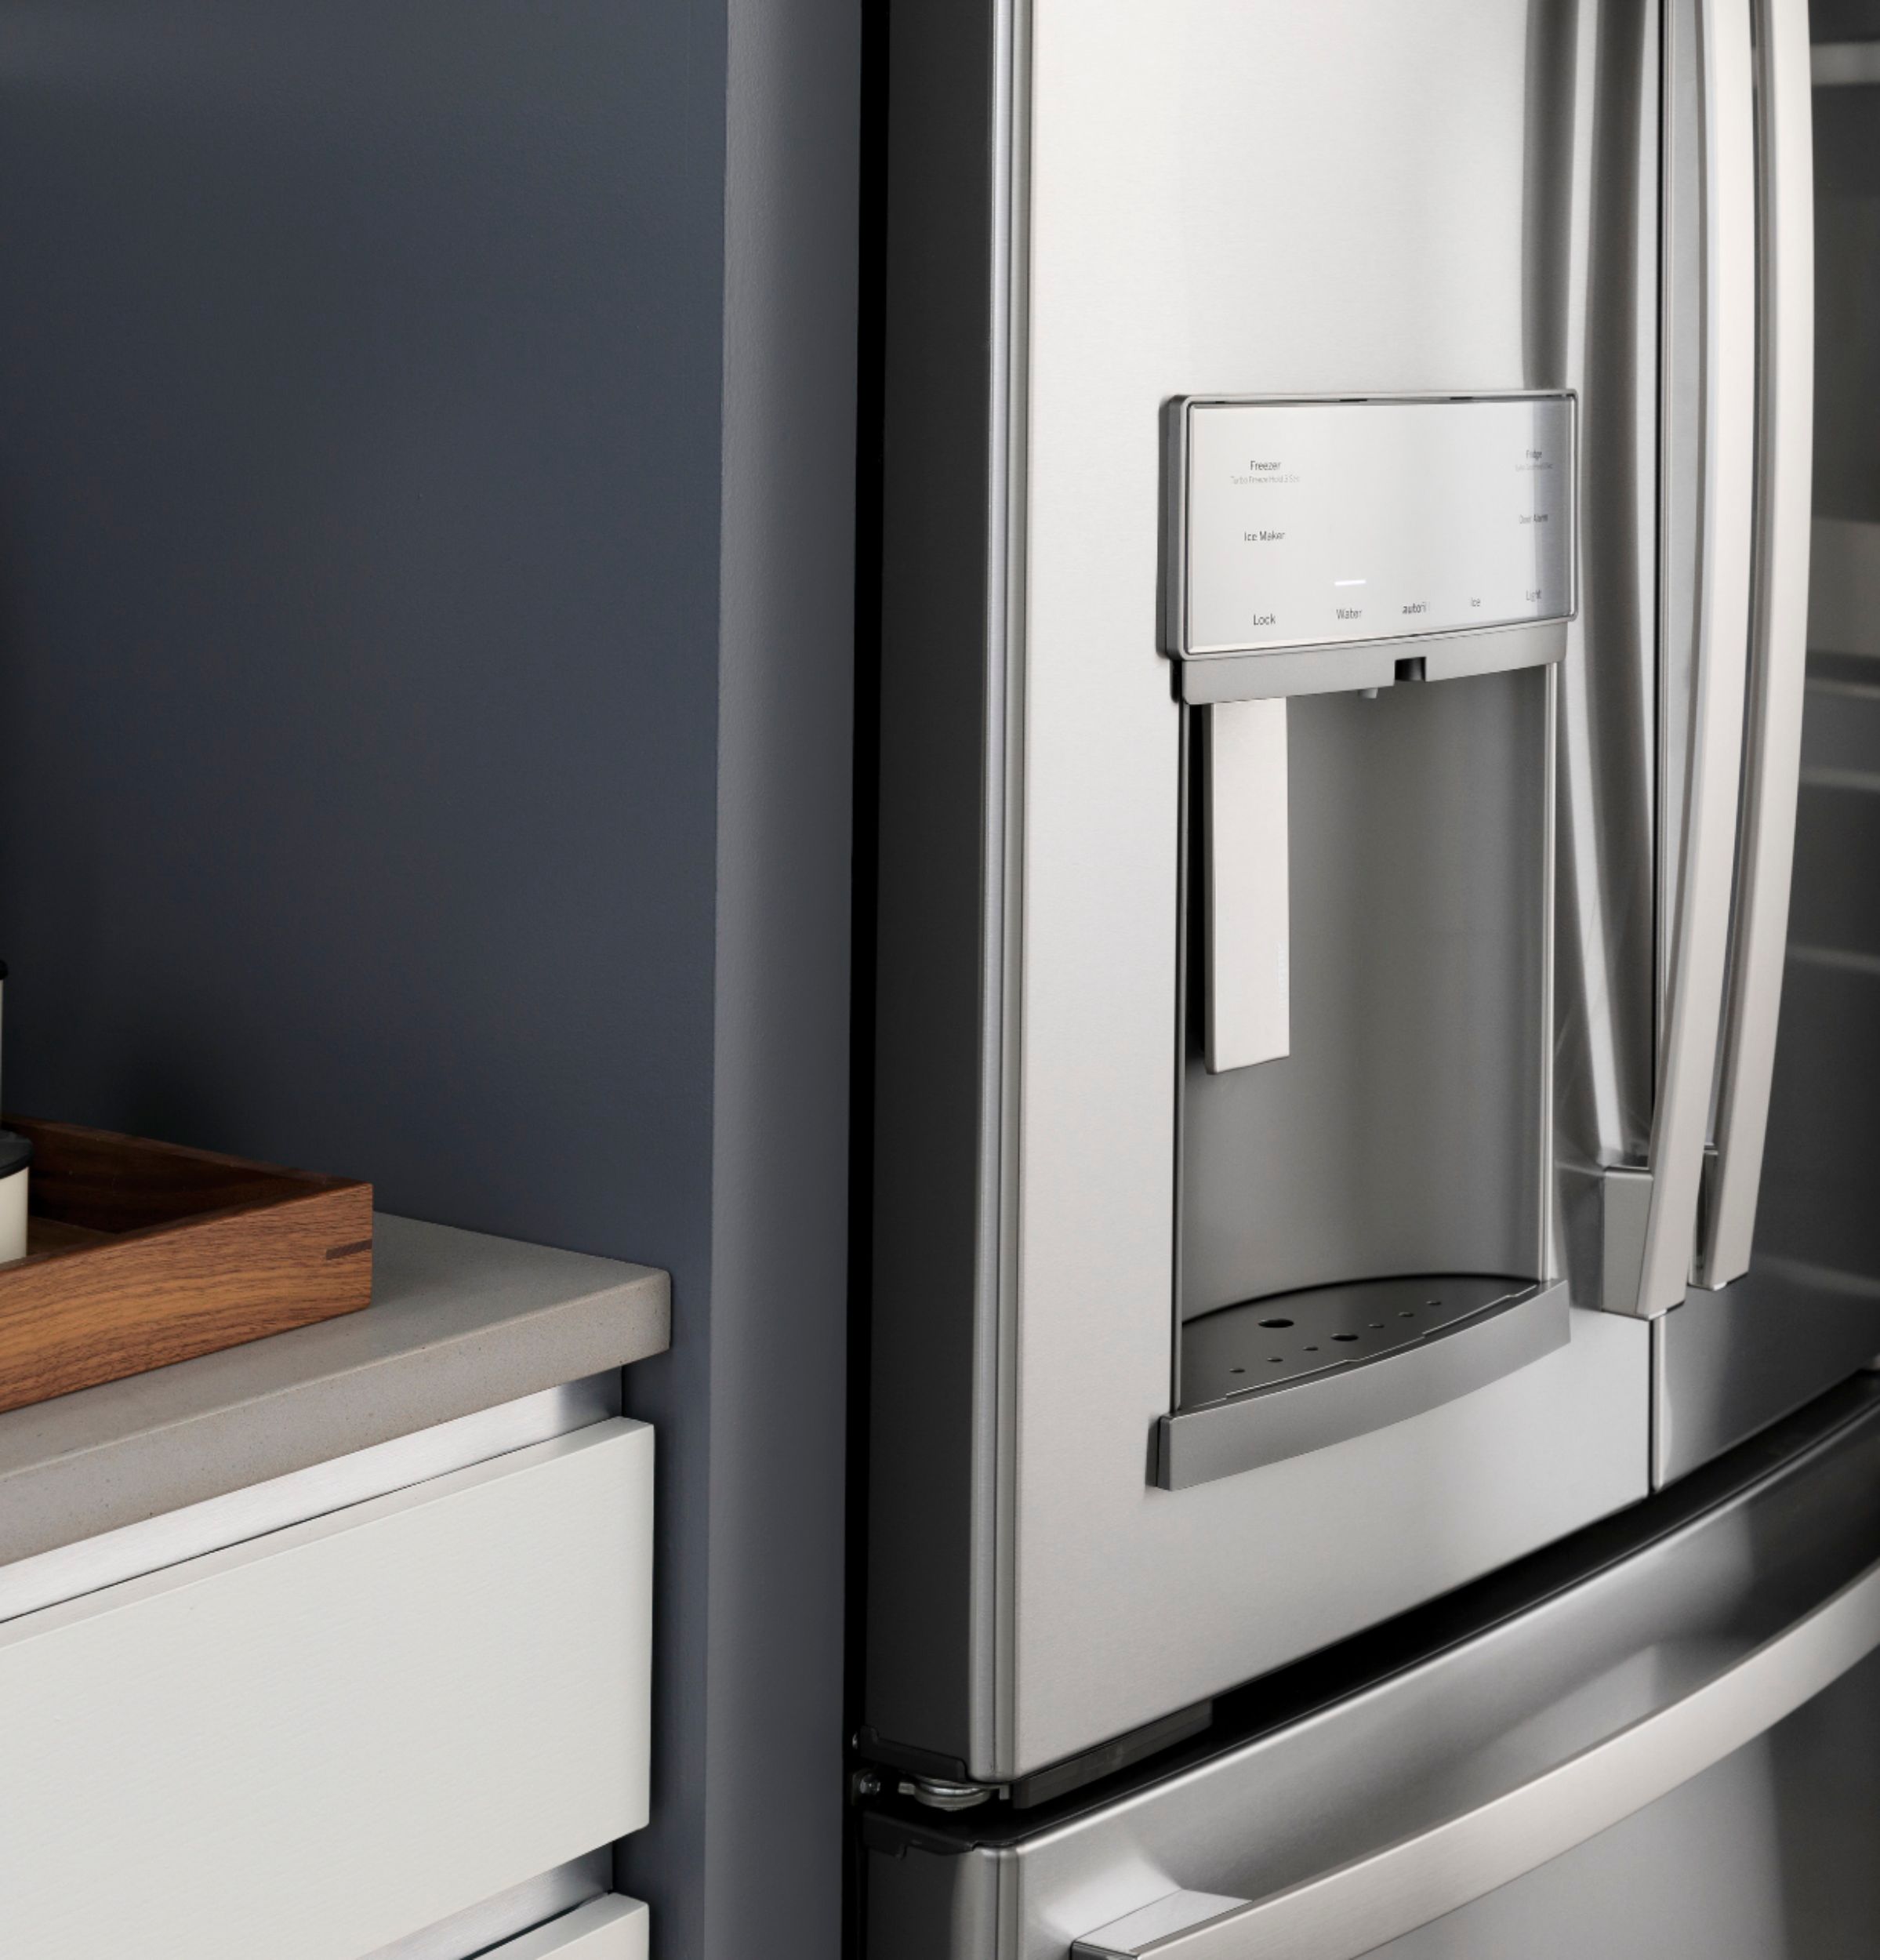 GE Introduces Fridges With Autofill Water Pitchers - Reviewed